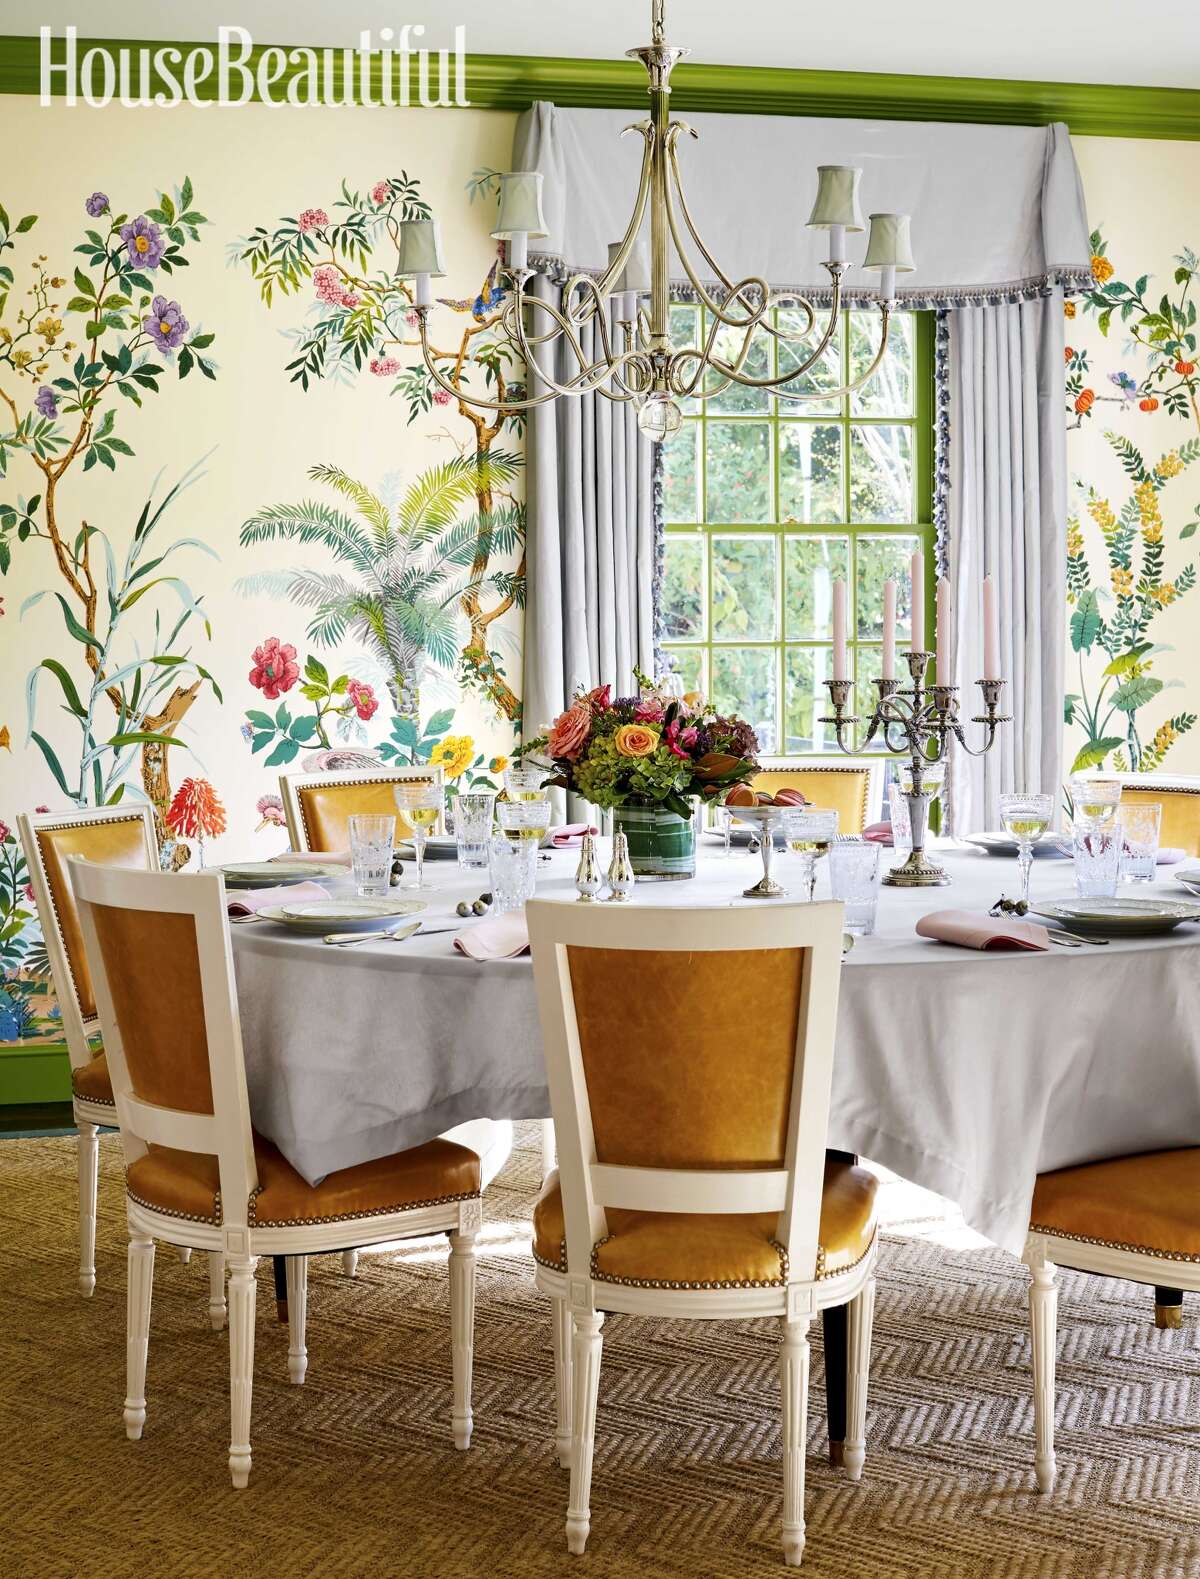 Bright, fresh colors dominate the dining room in Baily McCarthy's home. Tropical wallpaper, lime green trim and orange chairs add a vintage vibe.